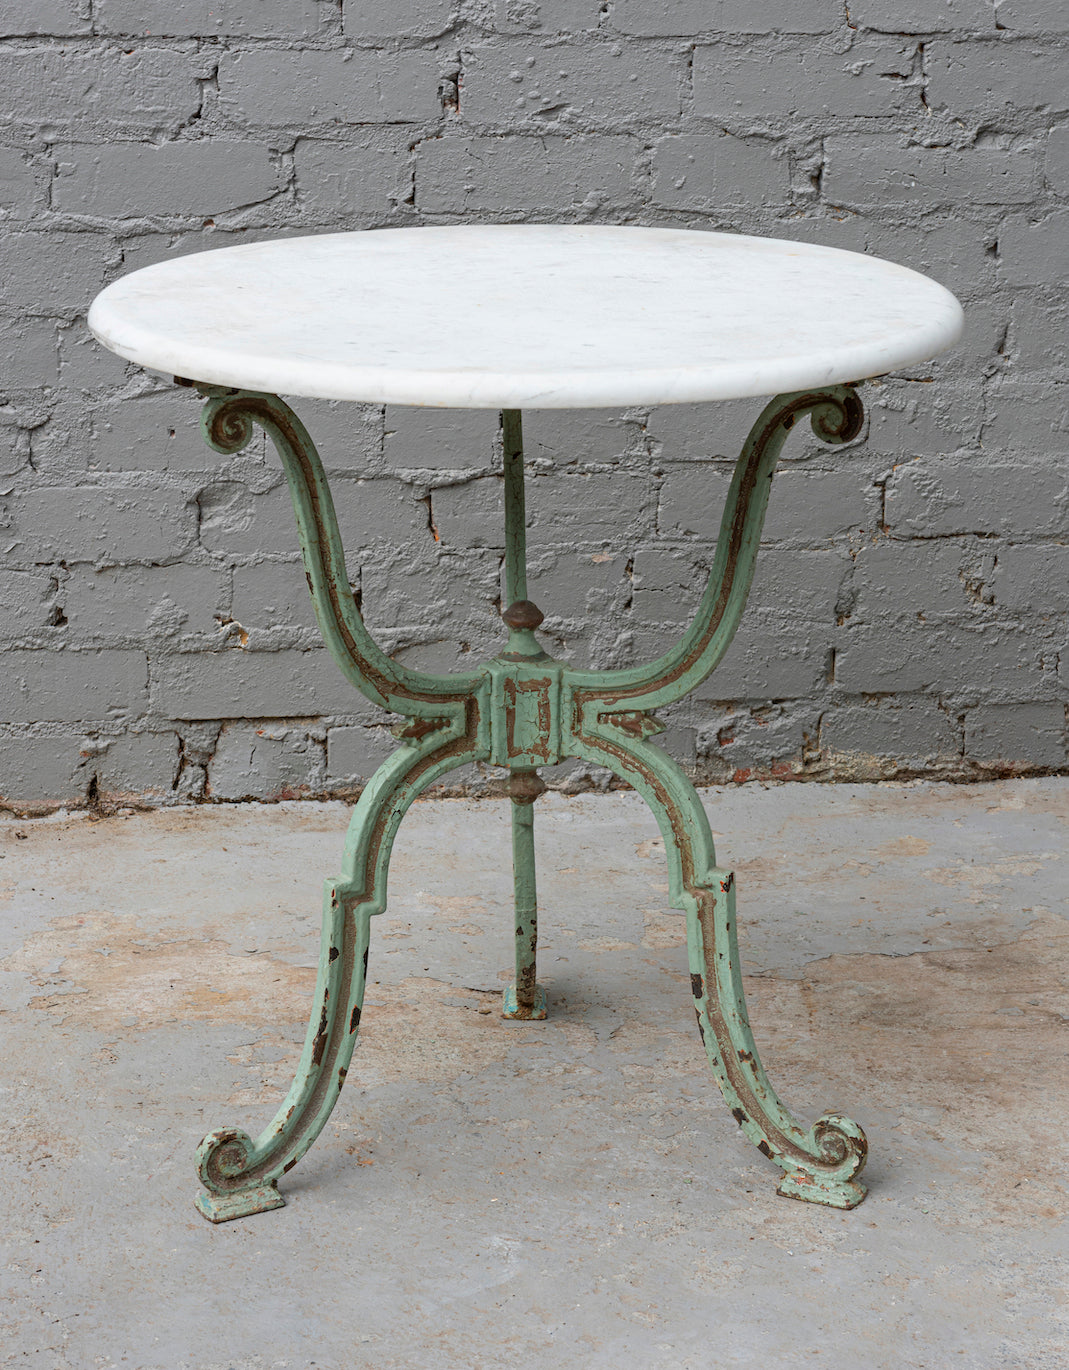 SOLD A pale green painted cast iron tri-form garden table, French 19th Century